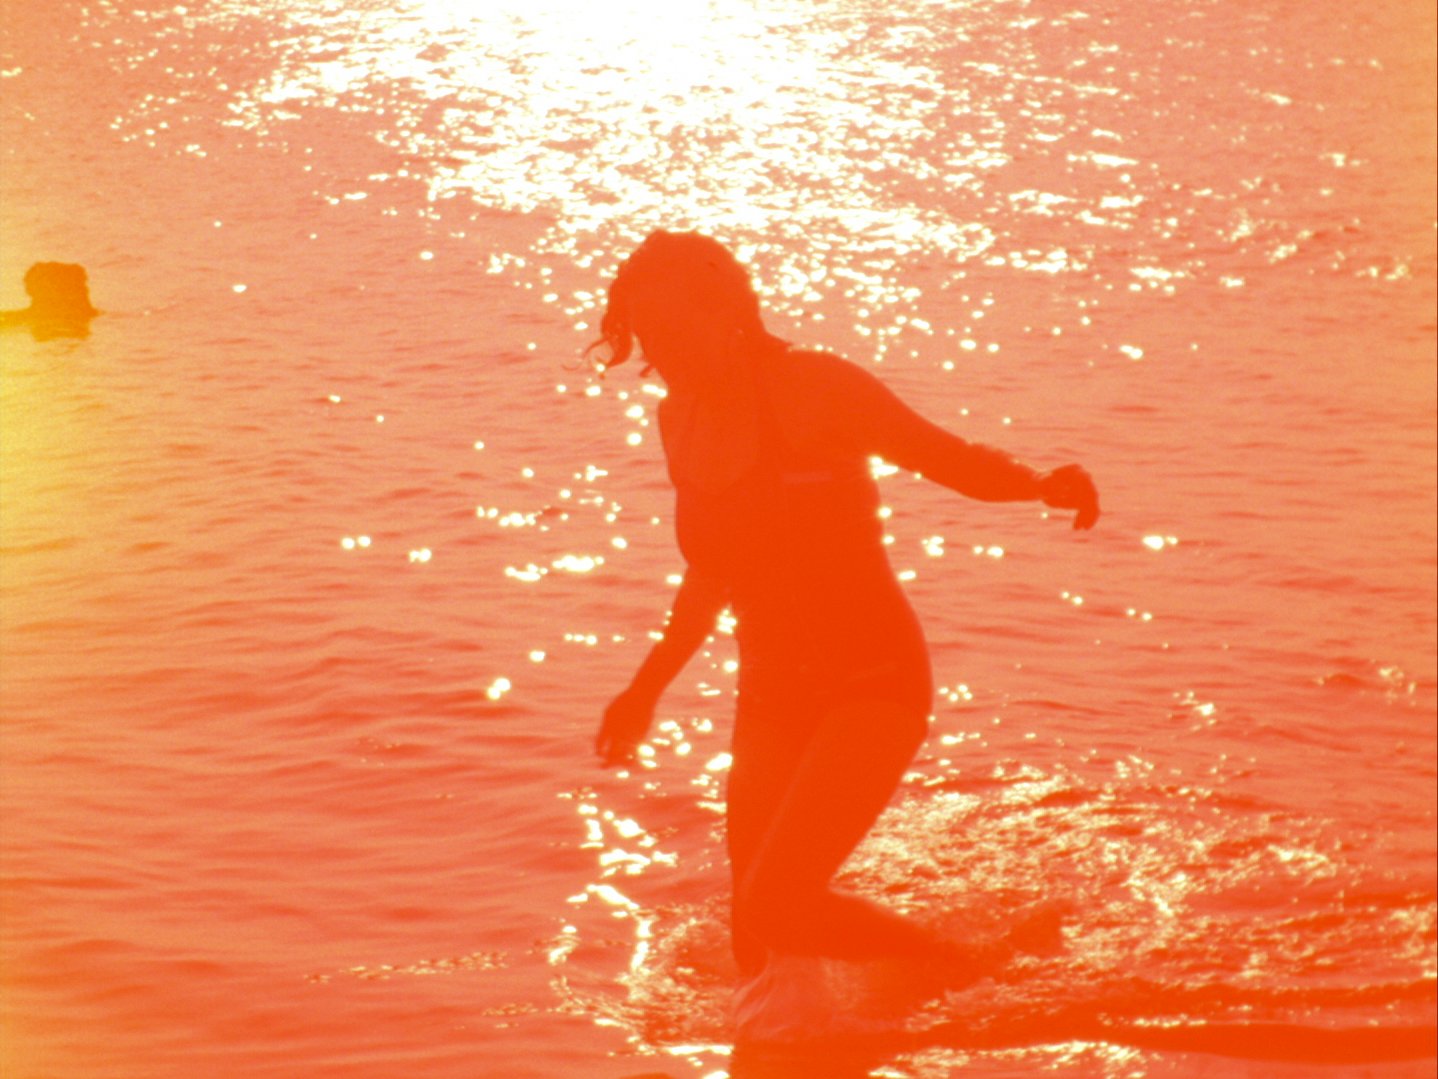 A washed out reddish image of a woman in the water with the sun shining, a film still from Pyramid by Margaret Salmon